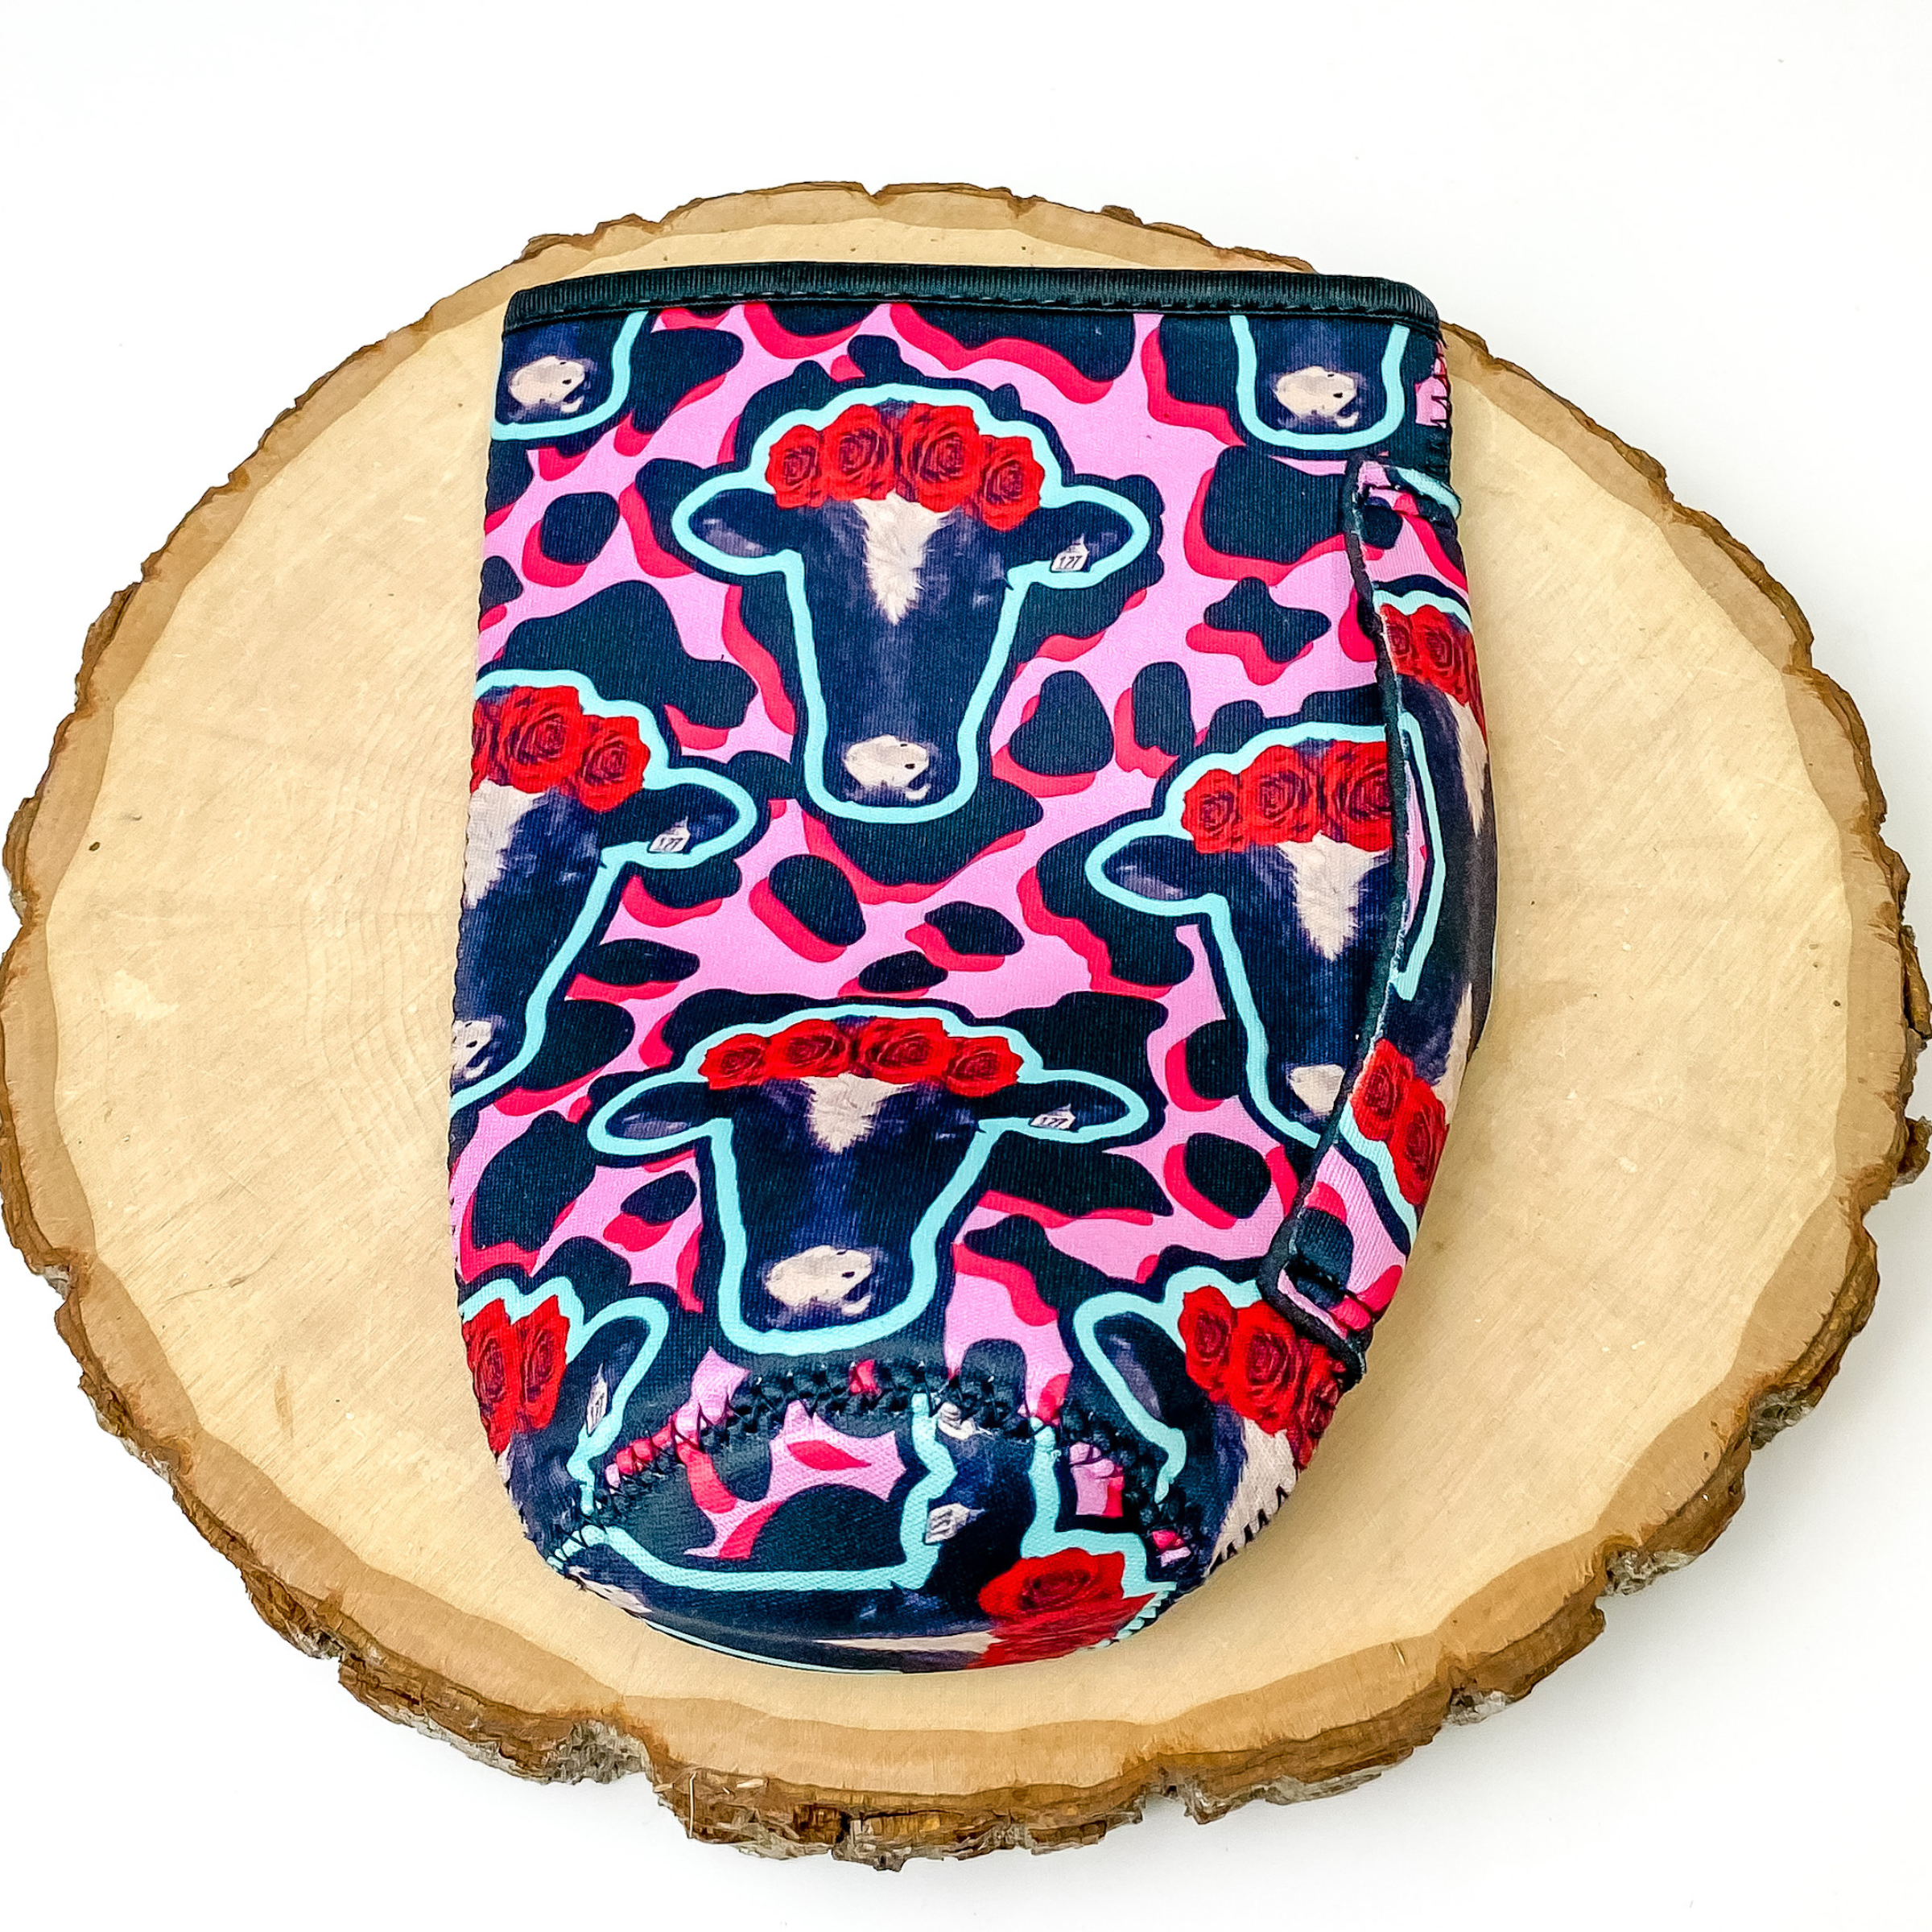 Tumbler drink sleeve with and pink, hot pink, and black cow print design. This drink sleeve also includes a handle and cow head print all over. This drink sleeve is pictured on a piece of wood on a white background. 